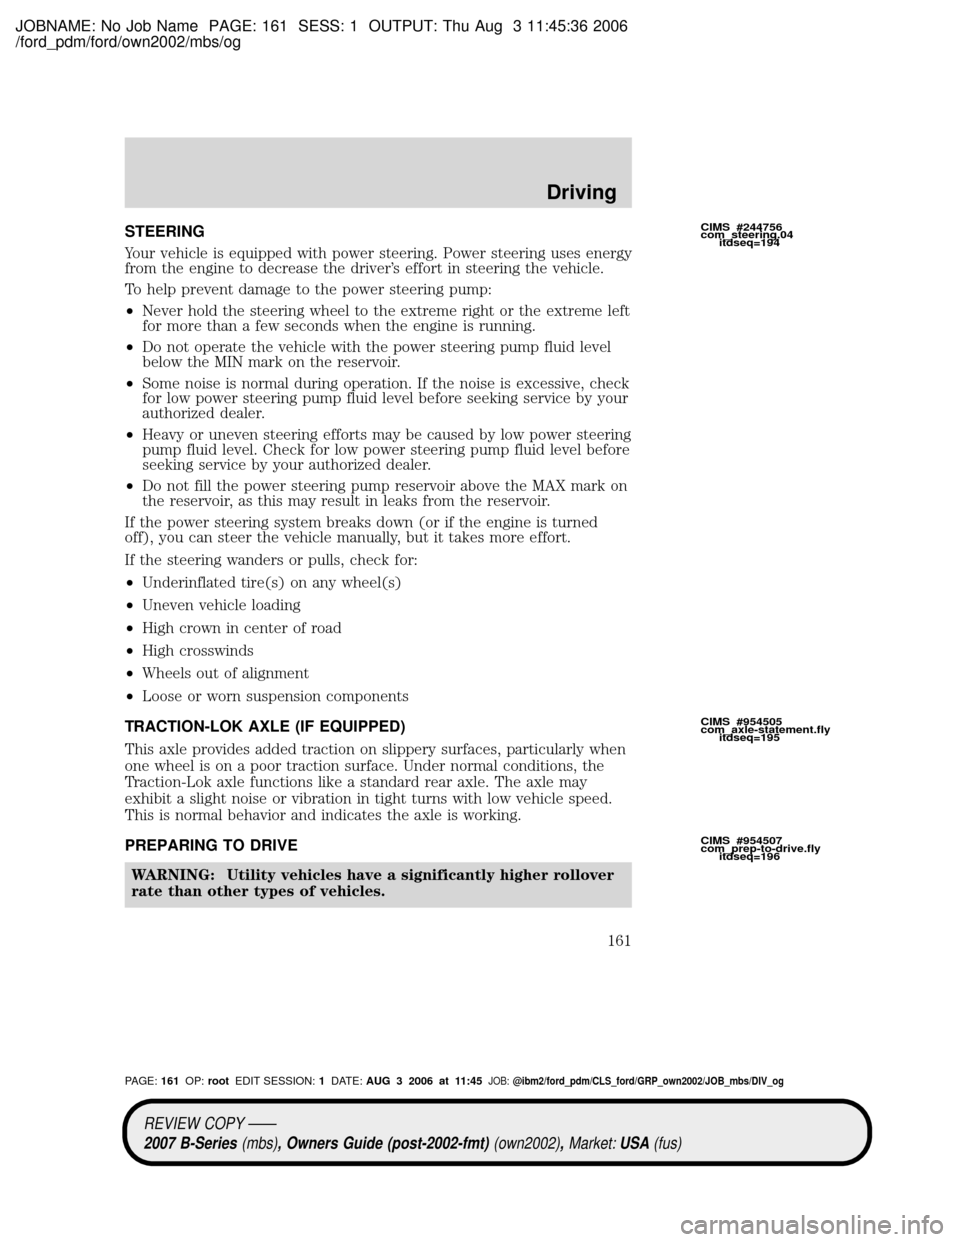 MAZDA MODEL B4000 TRUCK 2007  Owners Manual (in English) JOBNAME: No Job Name PAGE: 161 SESS: 1 OUTPUT: Thu Aug 3 11:45:36 2006
/ford_pdm/ford/own2002/mbs/og
STEERING
Your vehicle is equipped with power steering. Power steering uses energy
from the engine t